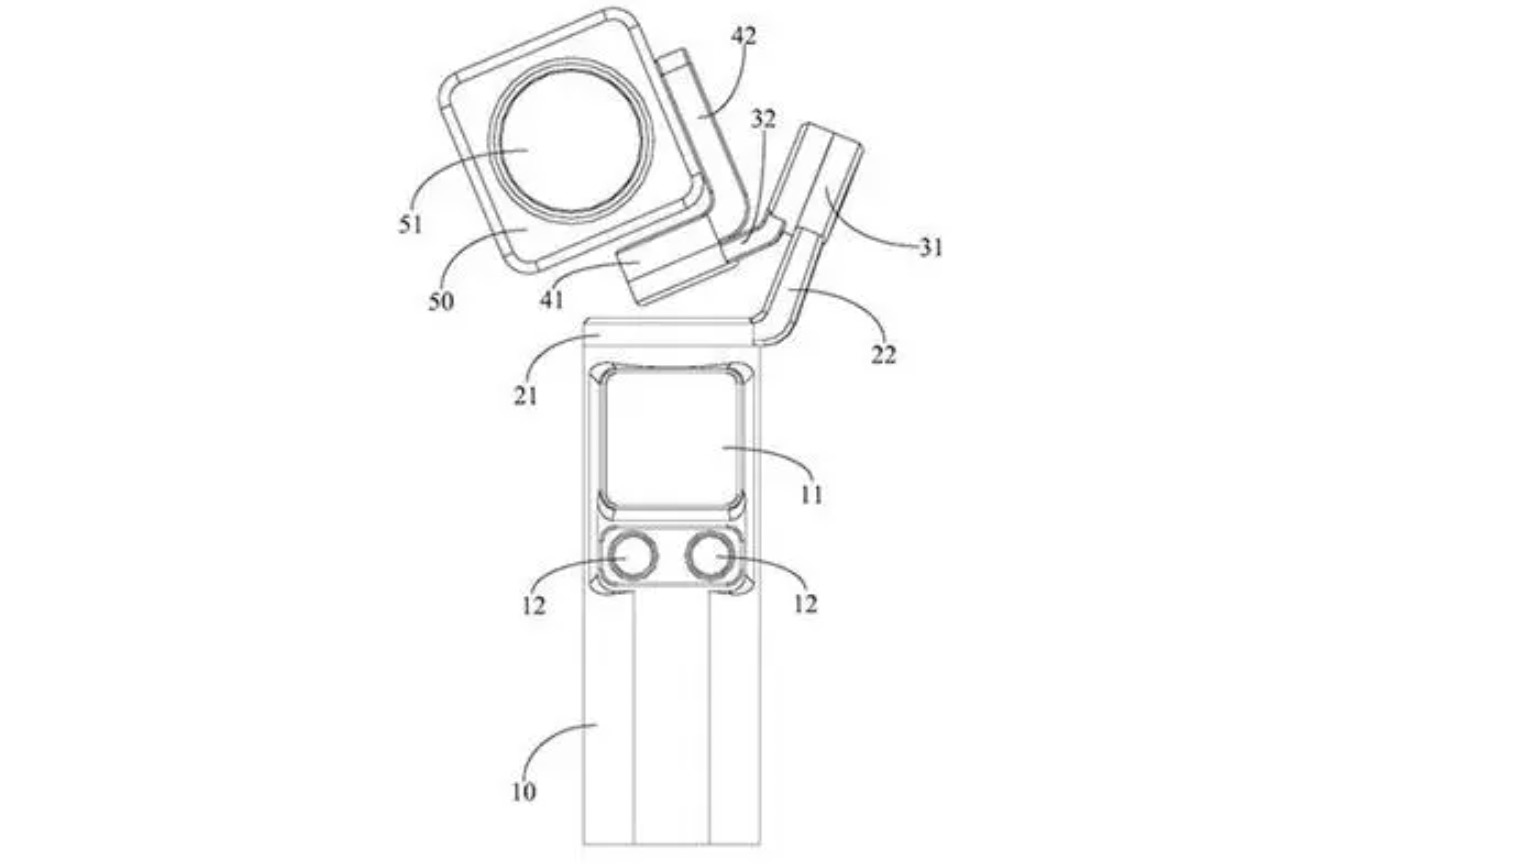 Leaked design diagrams that could be the new DJI Pocket 3